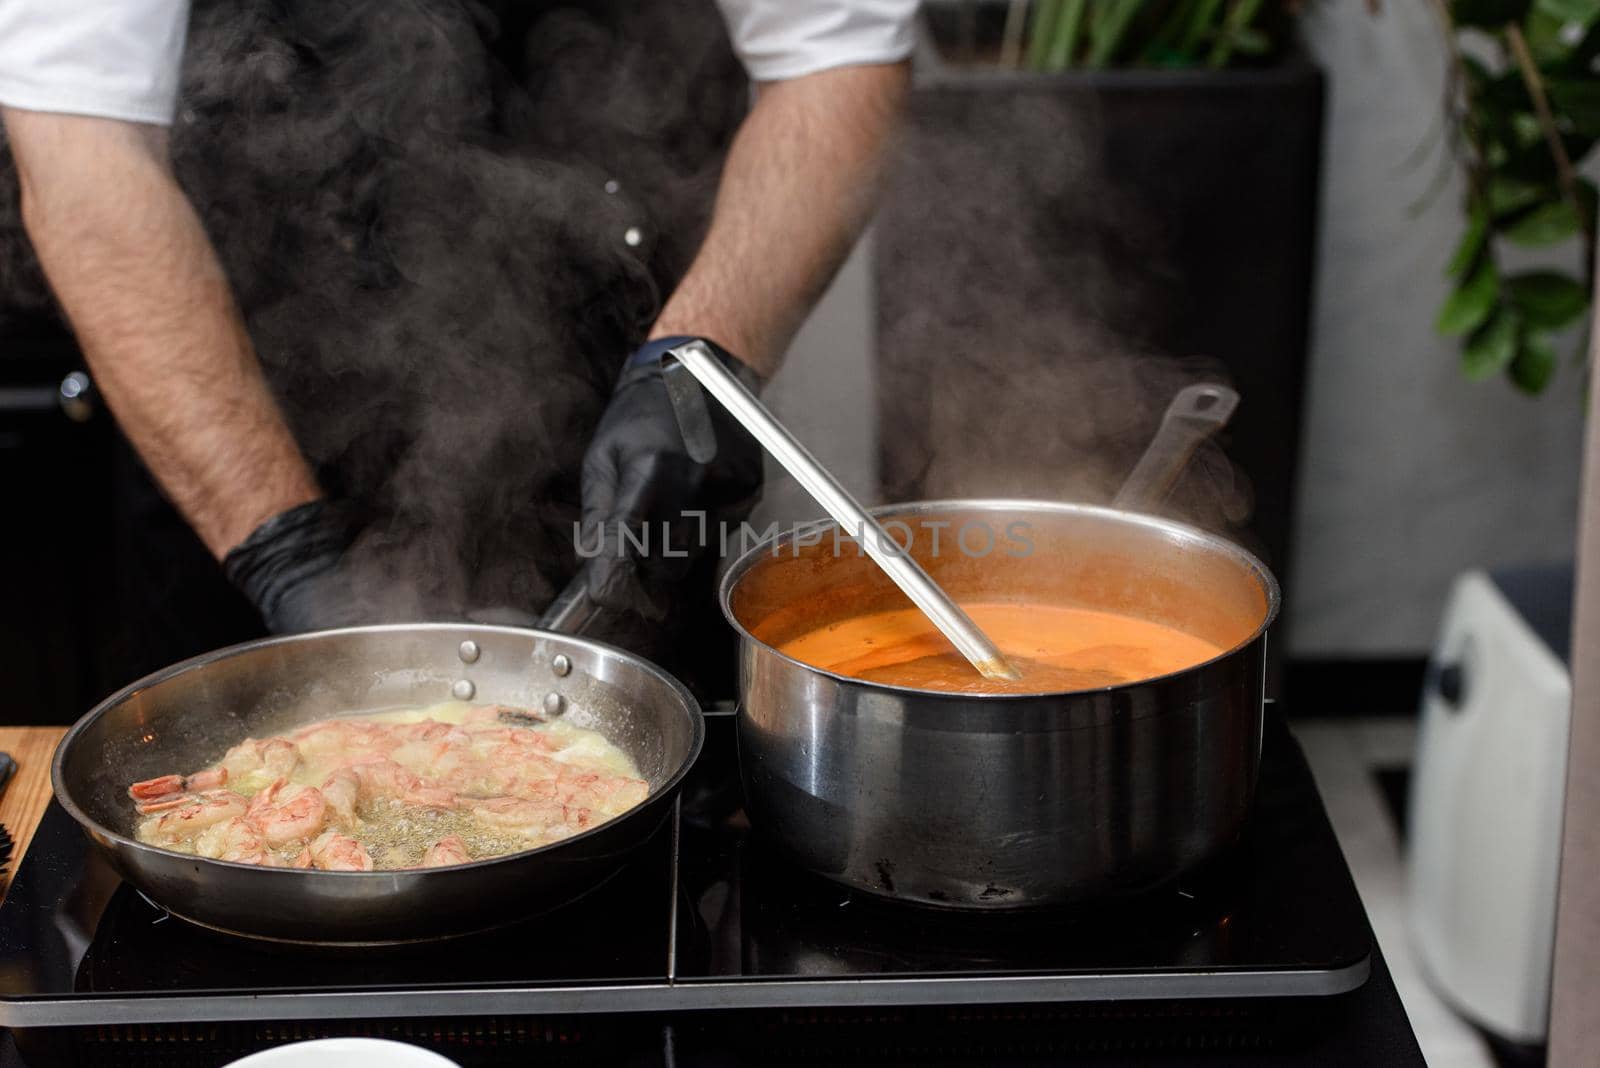 cooking process of Suquet de Peix soup with potatoes, herbs and fish with the addition of picada close-up in a saucepan on the table. by Ashtray25